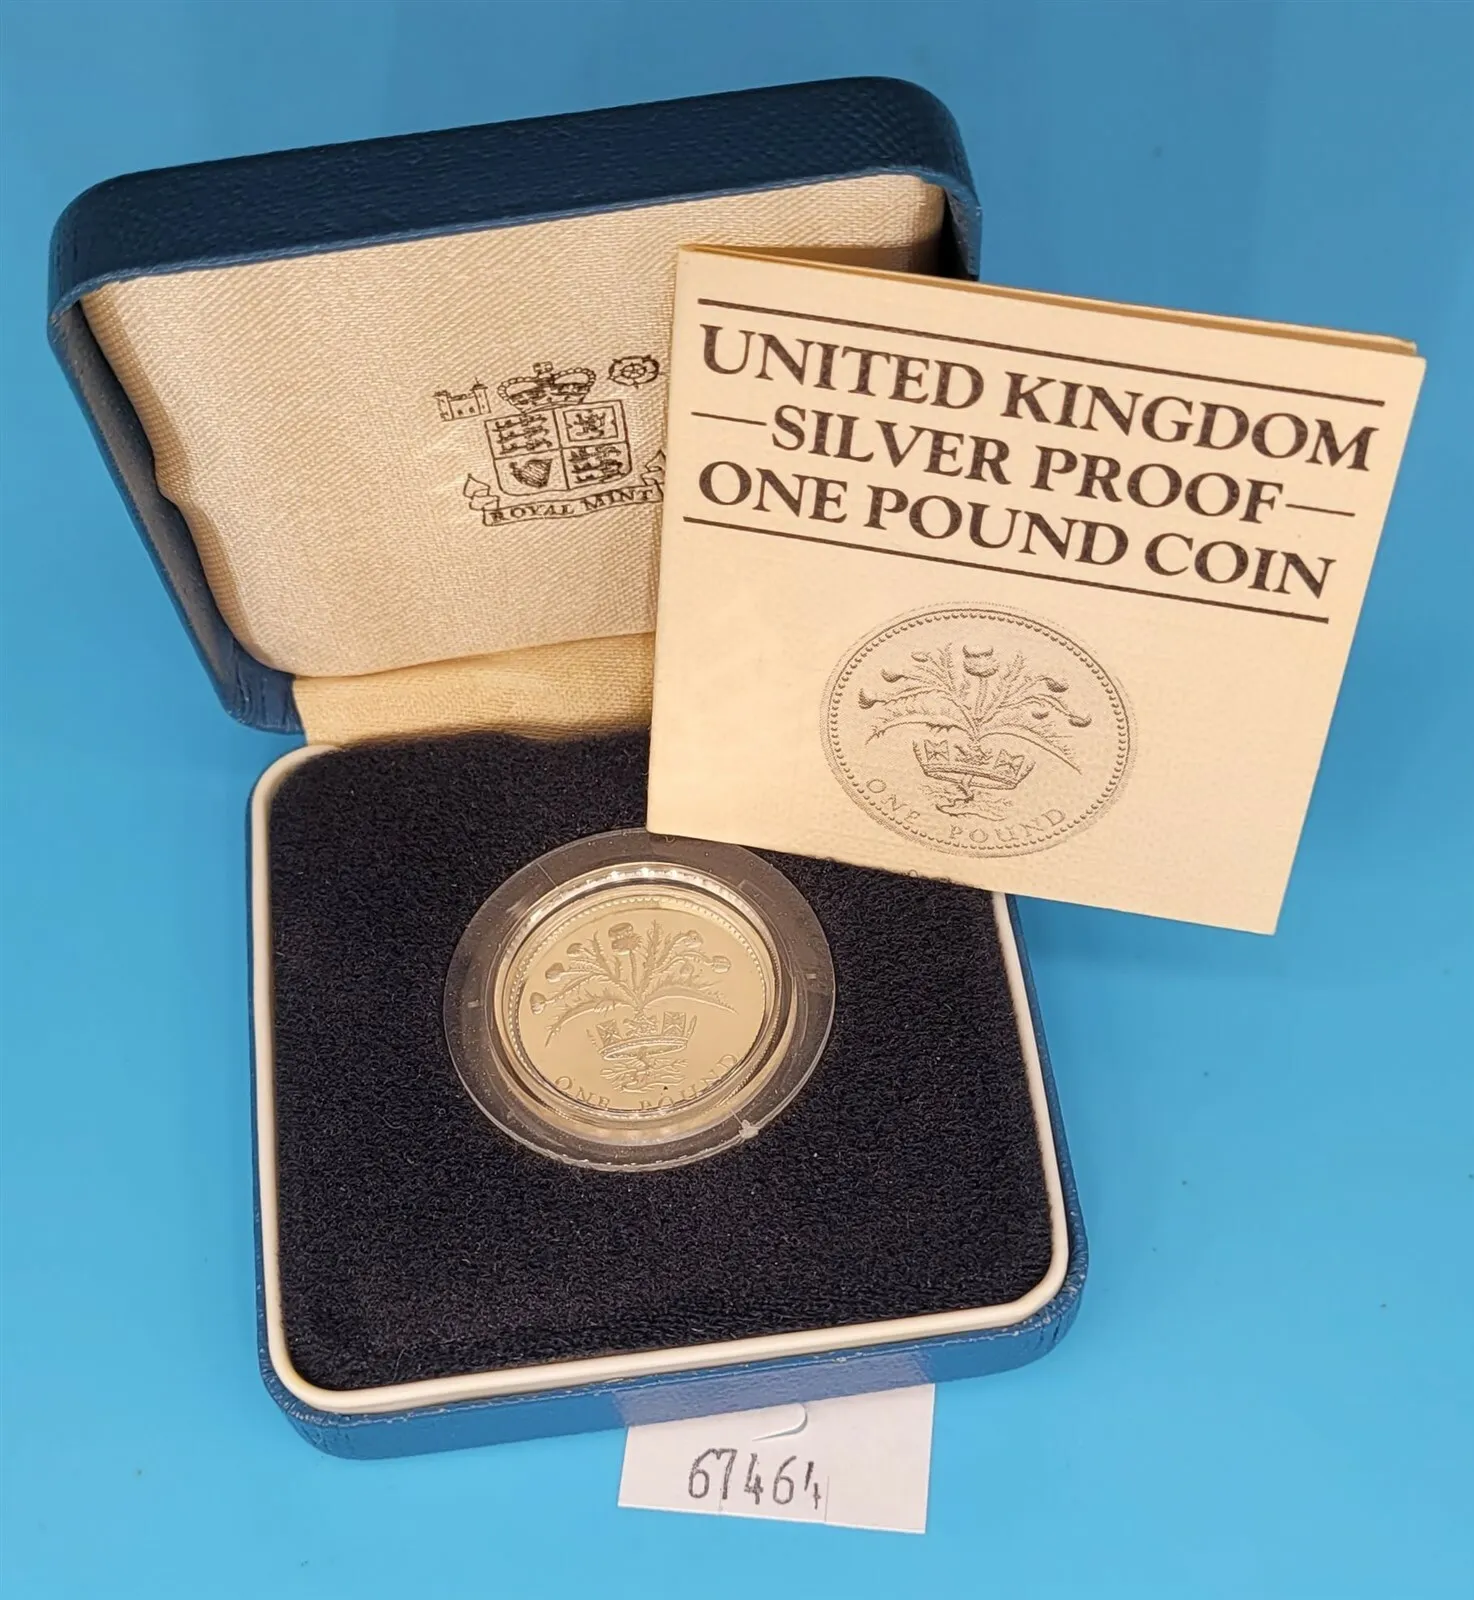 Wpcoins ~ 1 Pound, Great Britain, Sterling Silver, Proof, 50,000 Minted